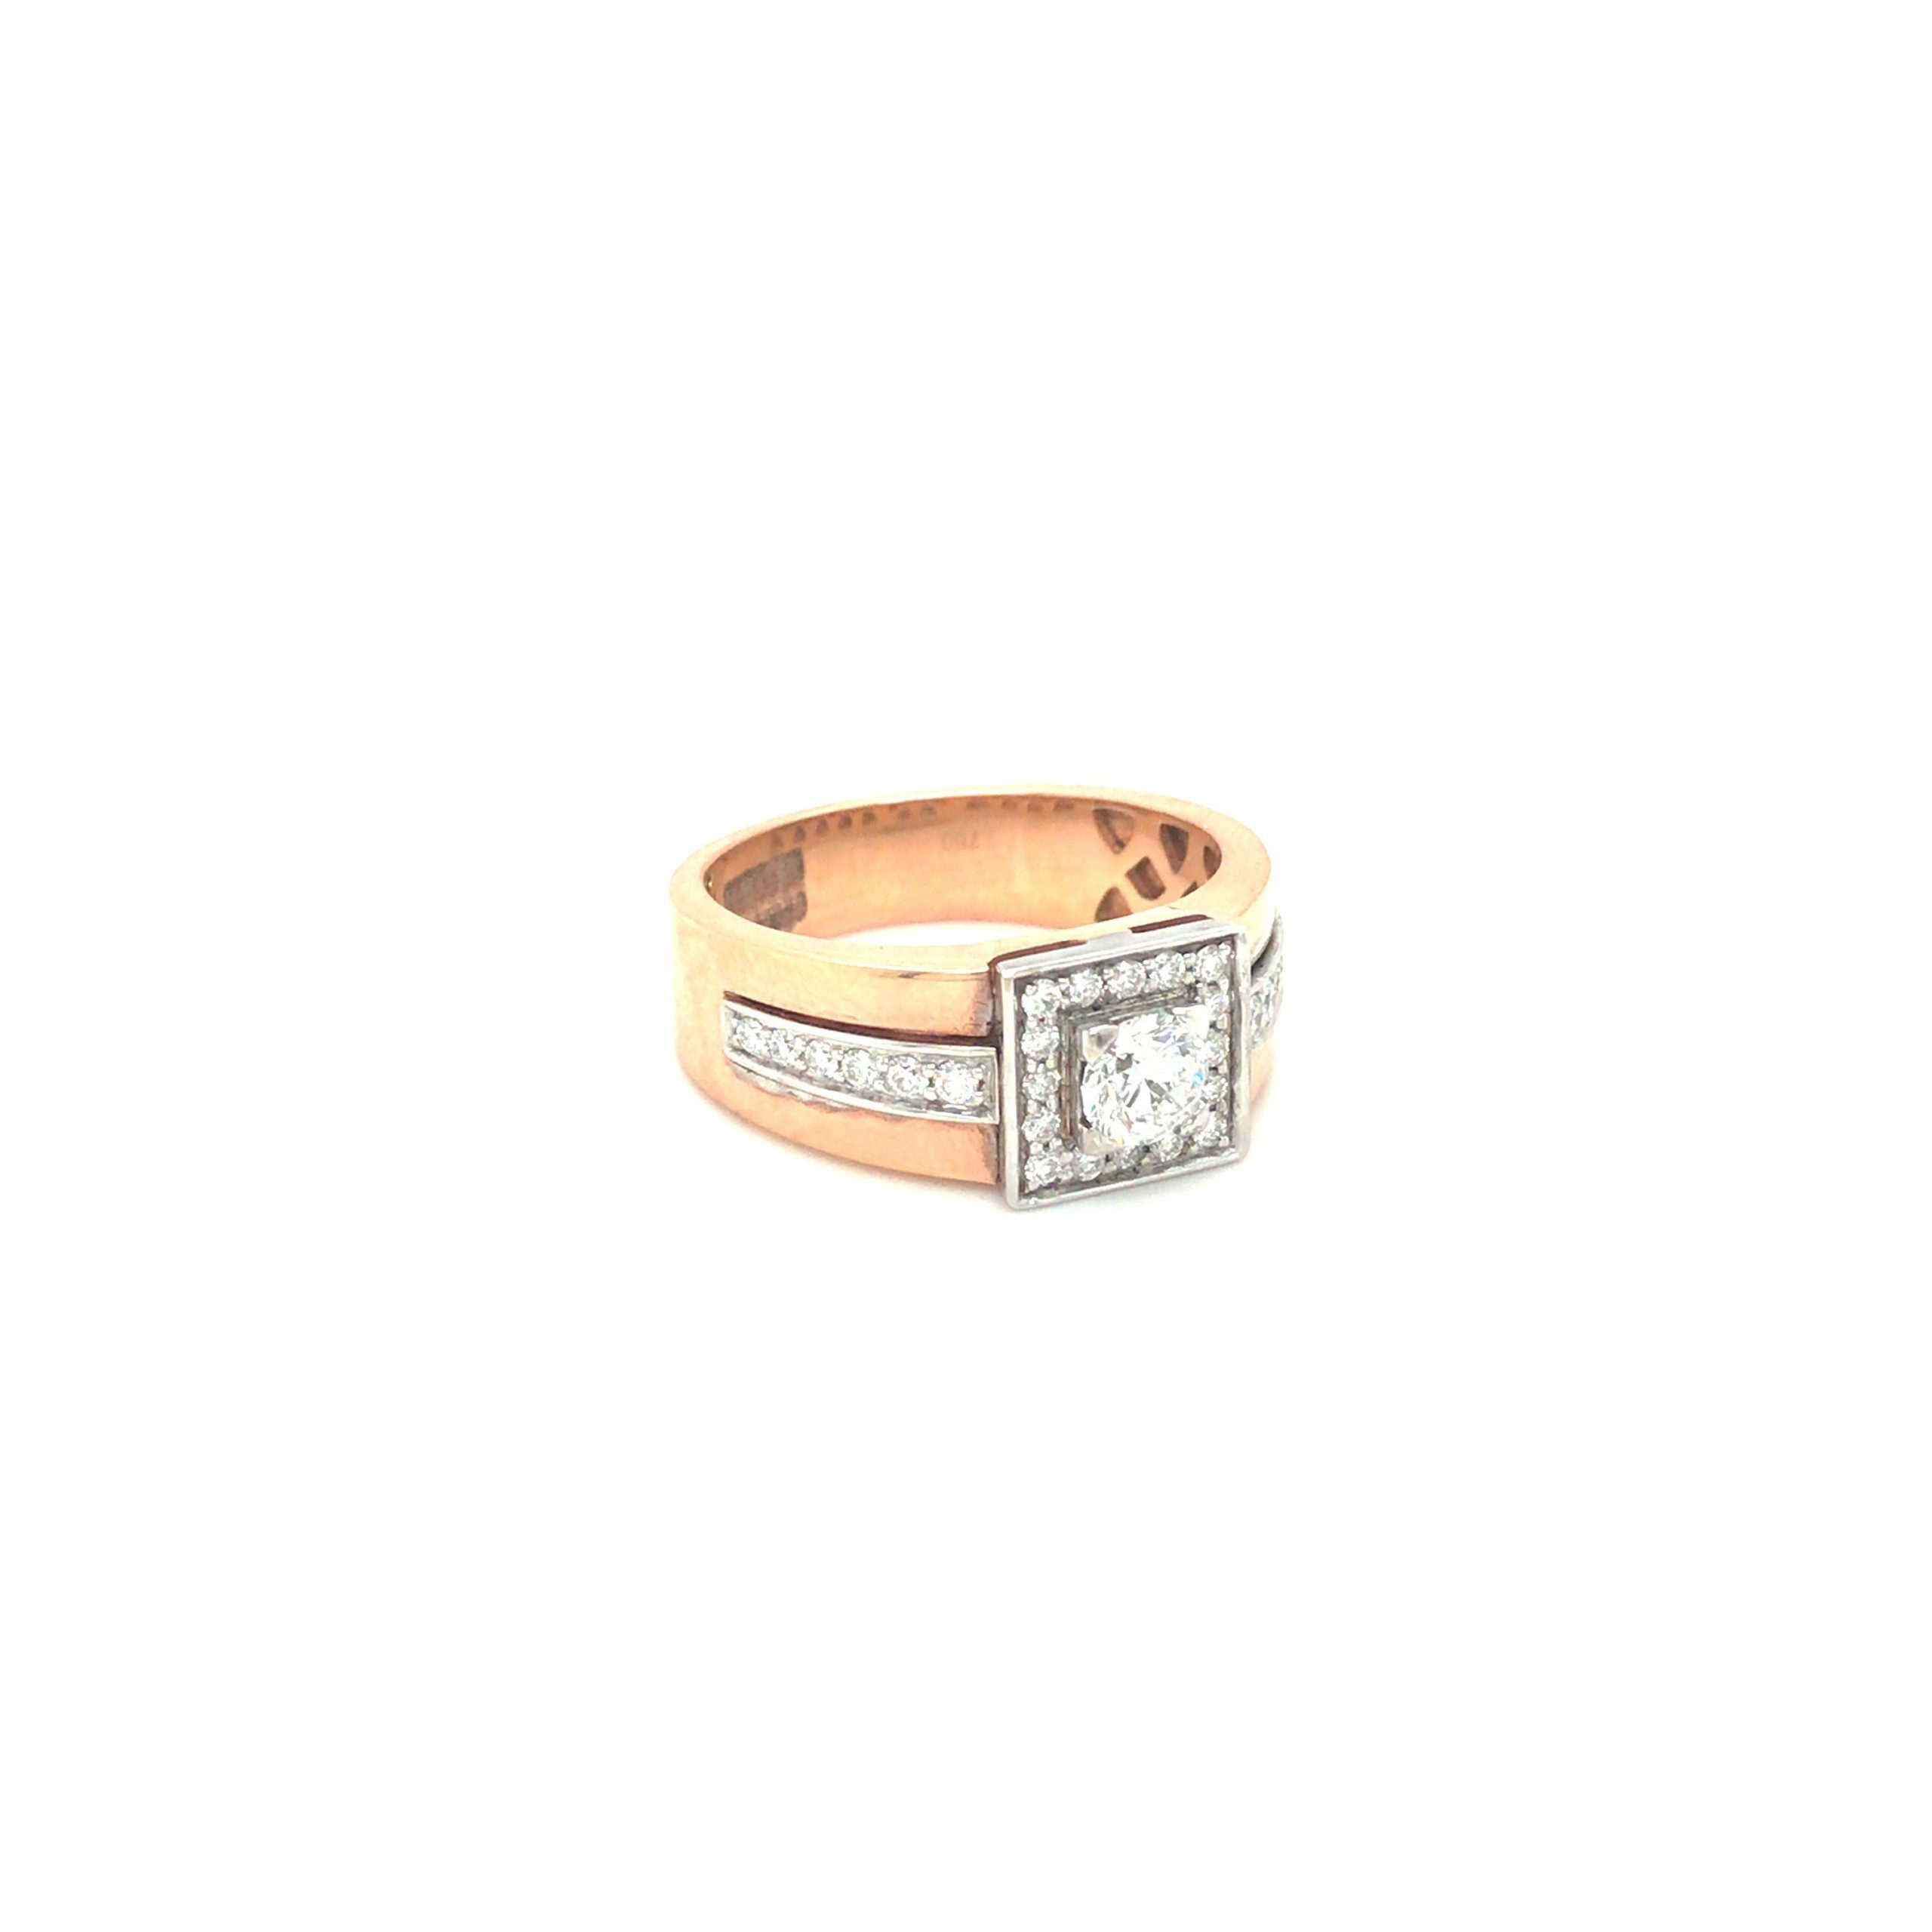 Buy quality 925 silver single diamond ring in Ahmedabad